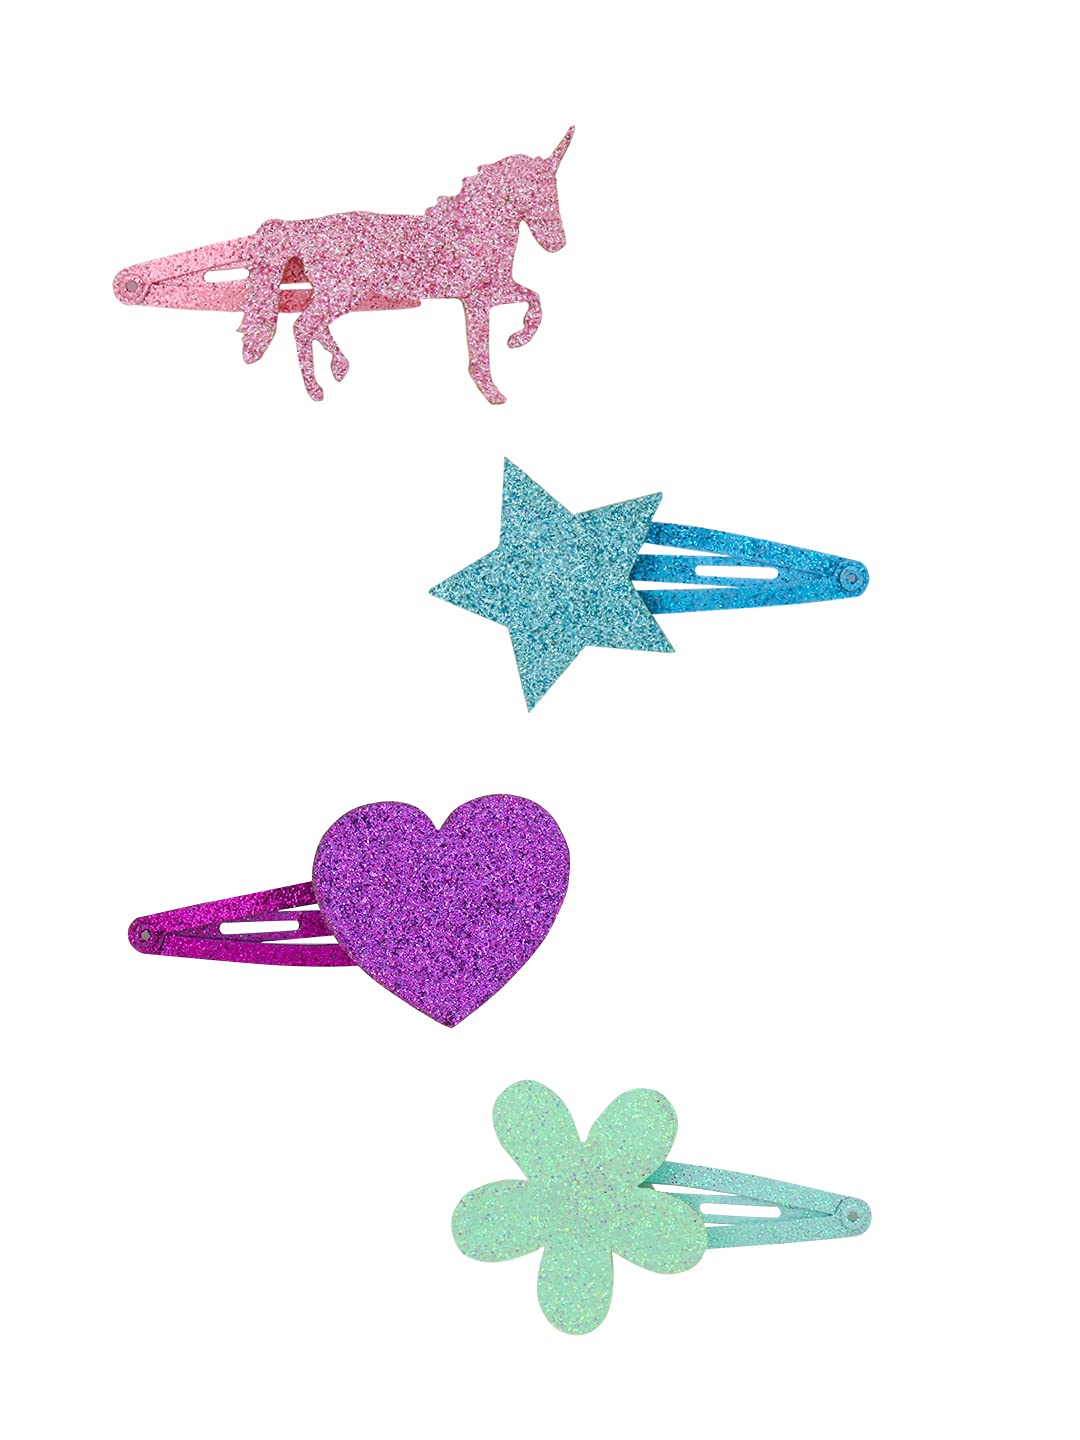 Melbees by Yellow Chimes 8 Pcs Hair Clips for Kids Unicorn Heart Star Fancy Snap Hairpins Hair Accessories for Girls Kids (Pack of 8), Multi-Color, Medium (YCHACL-KD016-MC)